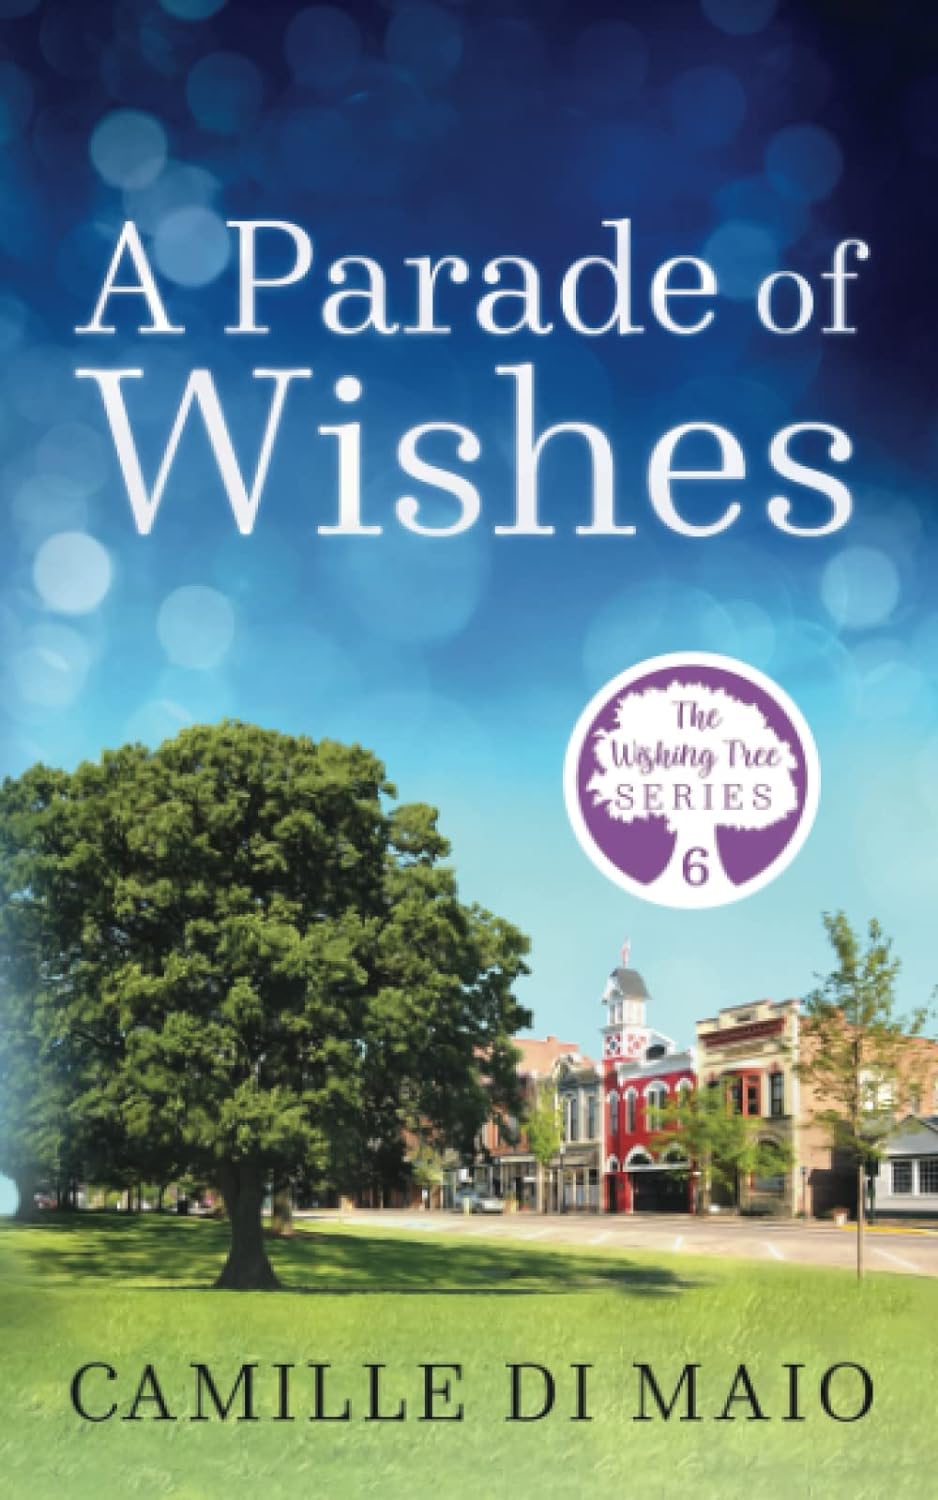 A Parade of Wishes